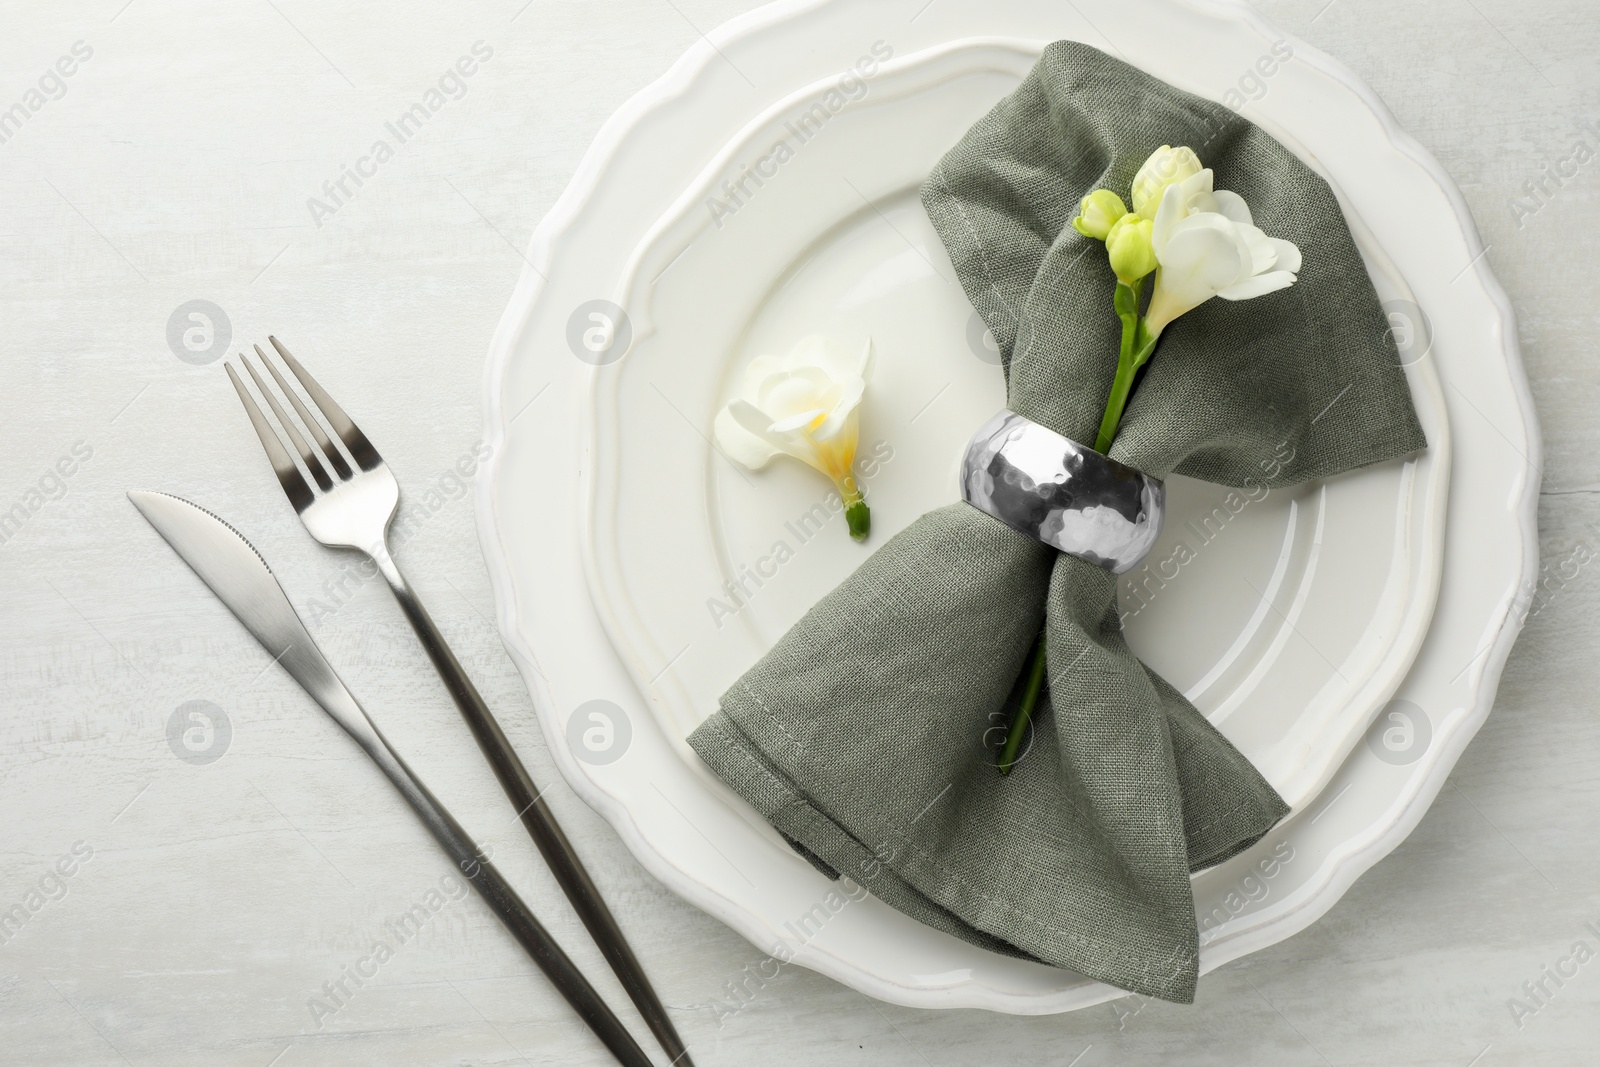 Photo of Stylish setting with cutlery, napkin, flowers and plates on light textured table, flat lay